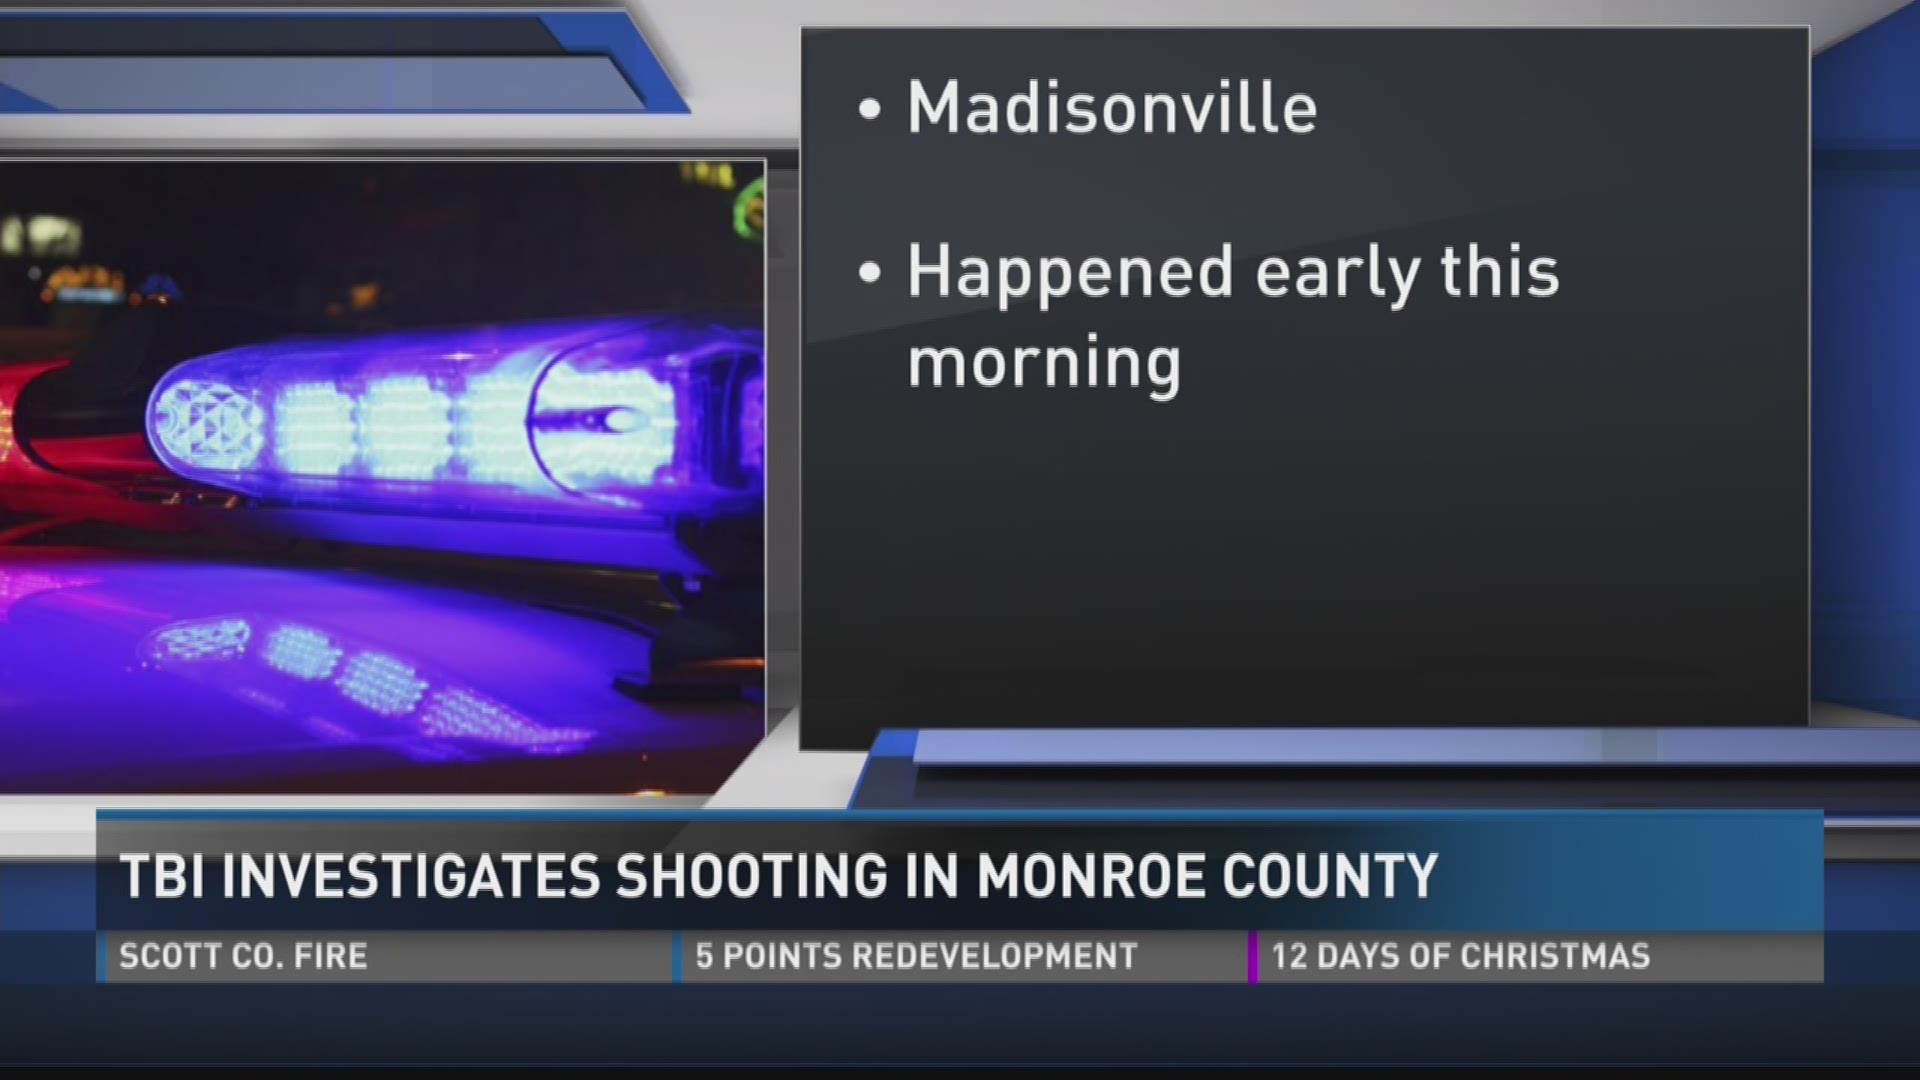 The TBI investigating a Friday morning shooting in Monroe County.